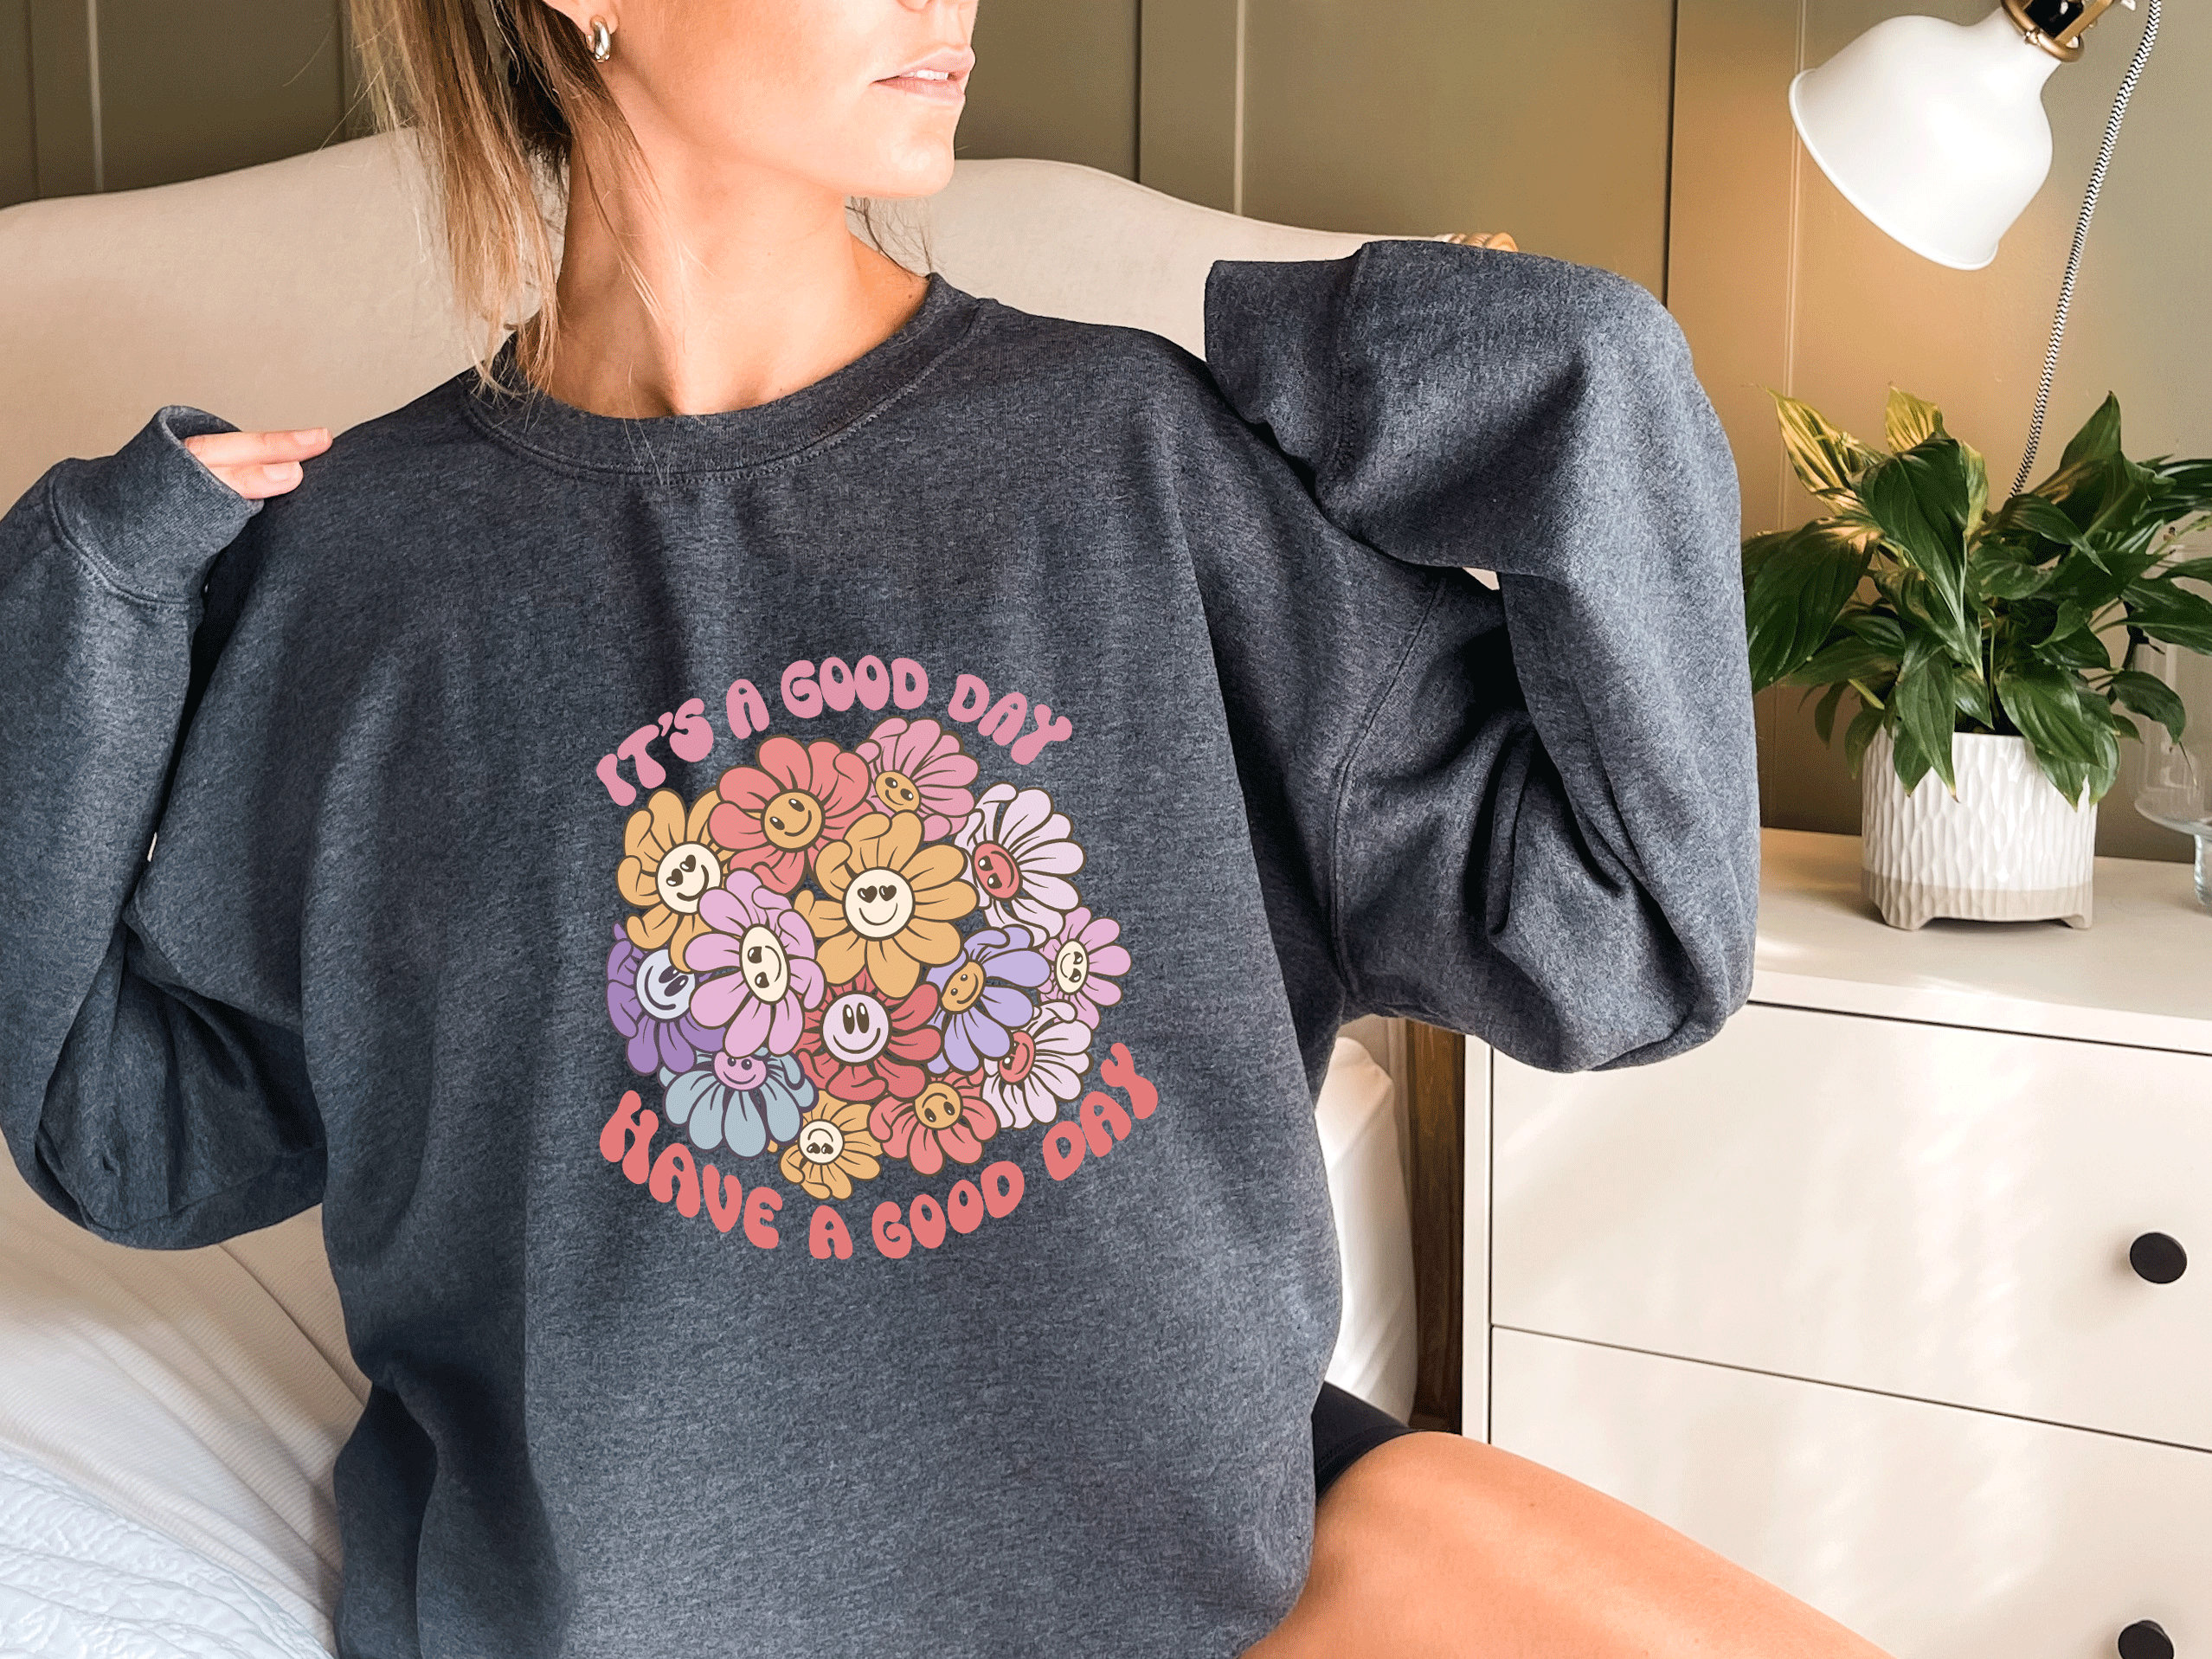 It's A Good Day Have A Good Day Sweatshirts, Summer Shirt,positive